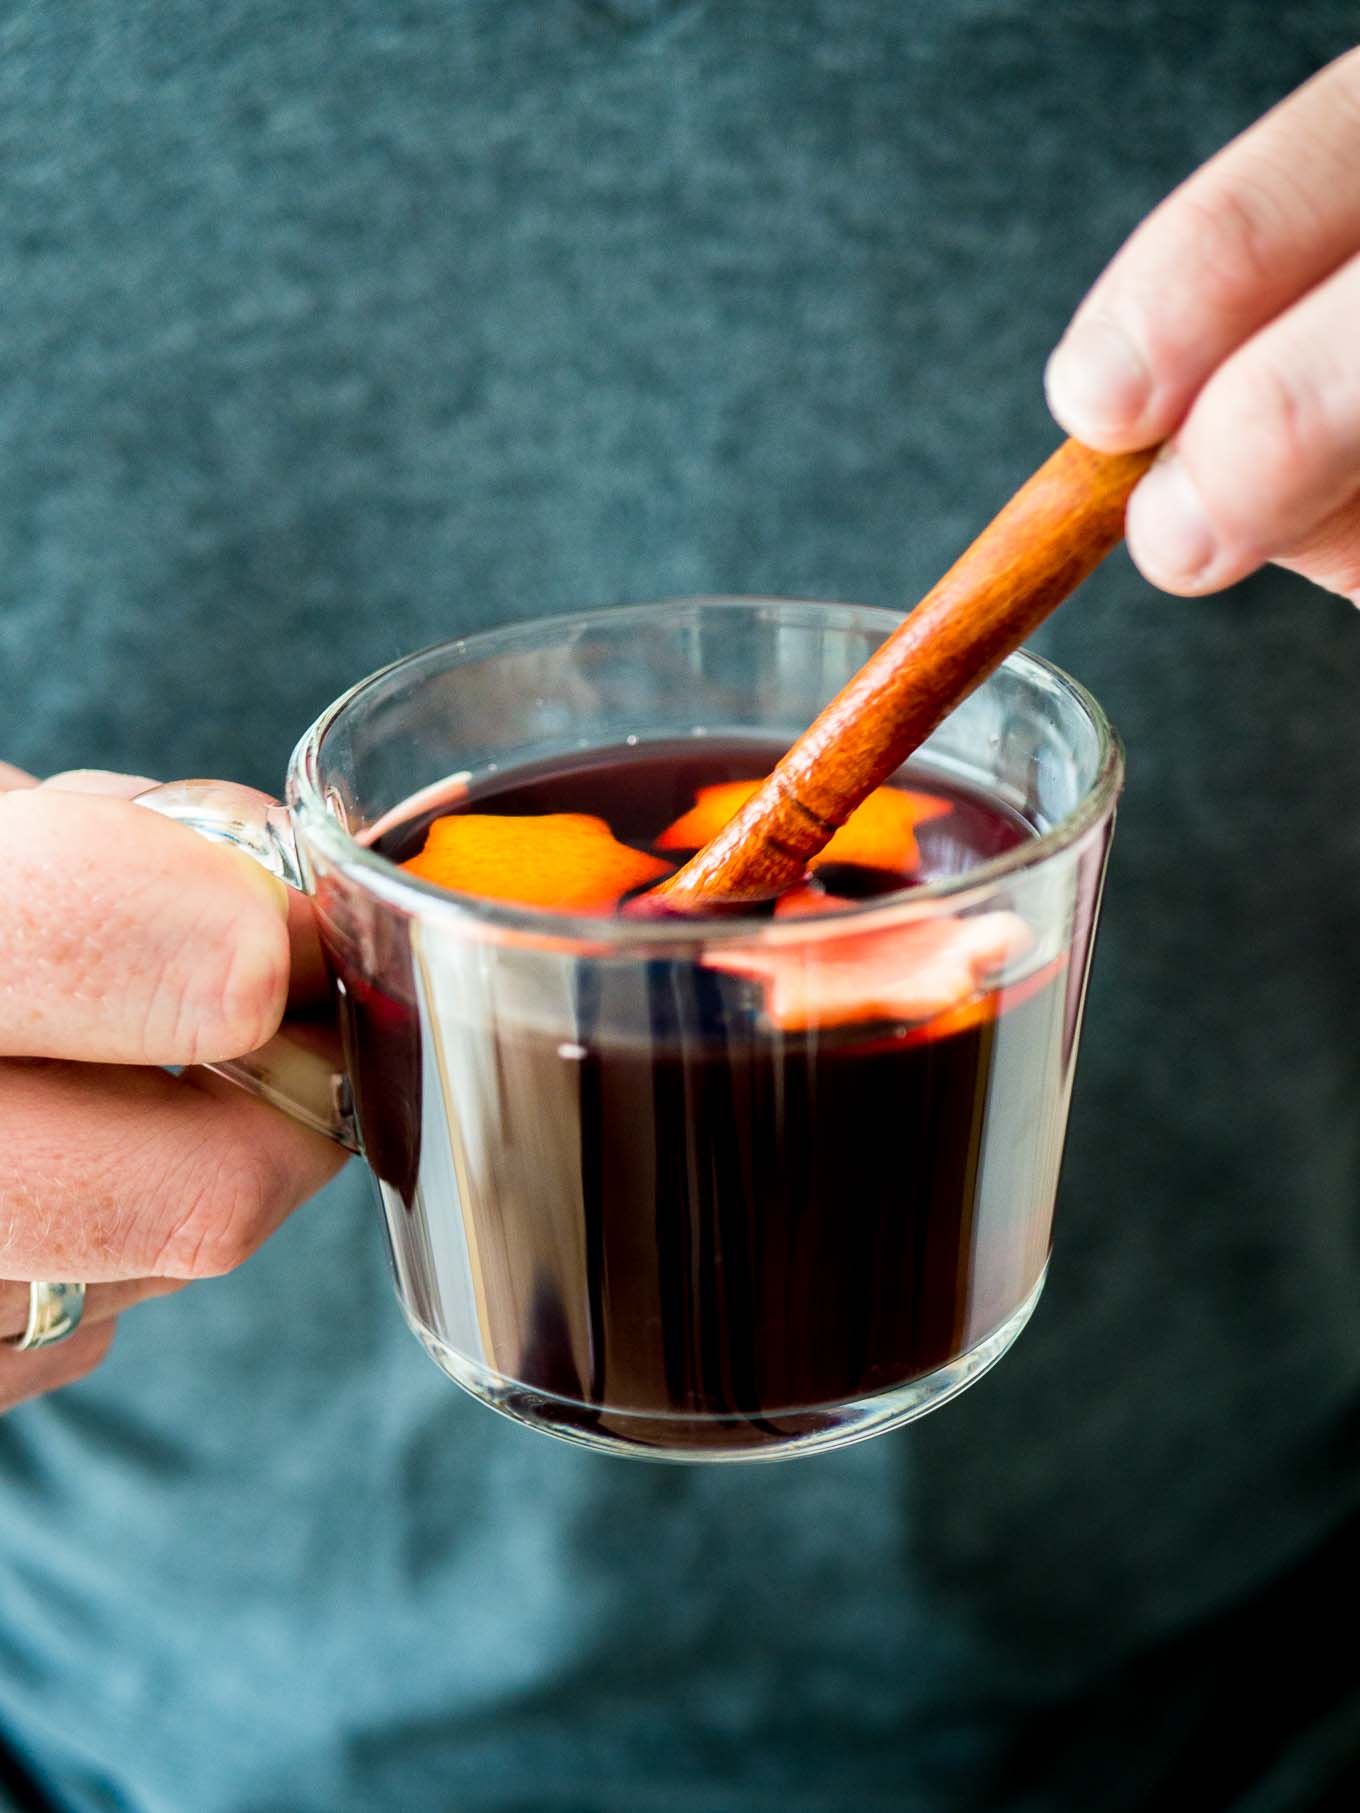 This spiced grape holiday punch is the perfect beverage to serve at your winter celebrations! Hot mulled grape juice is flavored with Christmas spices making it the perfect non-alcoholic beverage for the holidays!